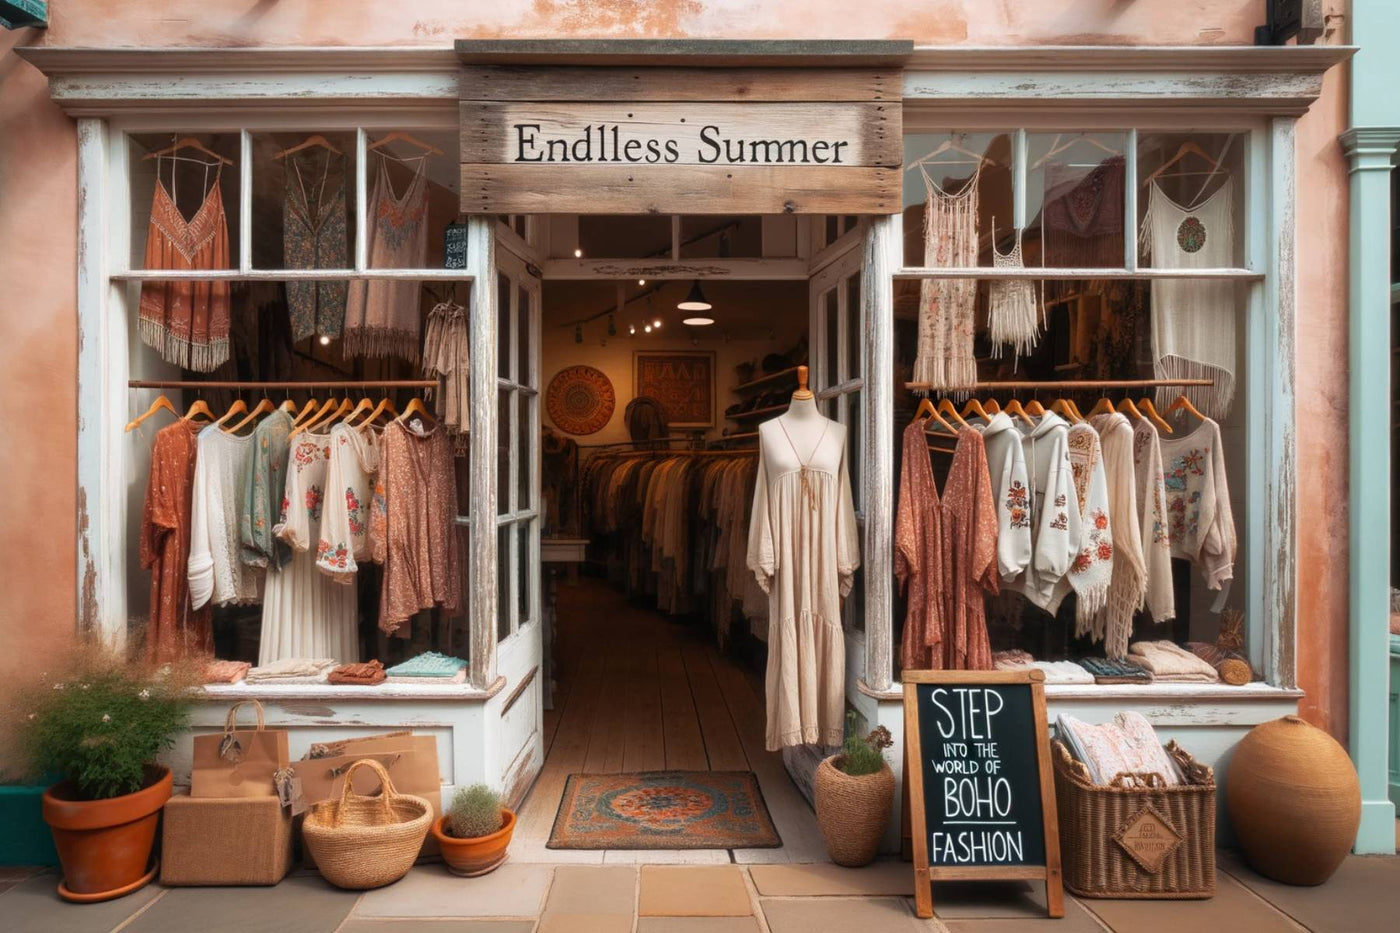 Dress Up with Endless Summer: A Step-by-Step Guide to Perfect Boho Fashion